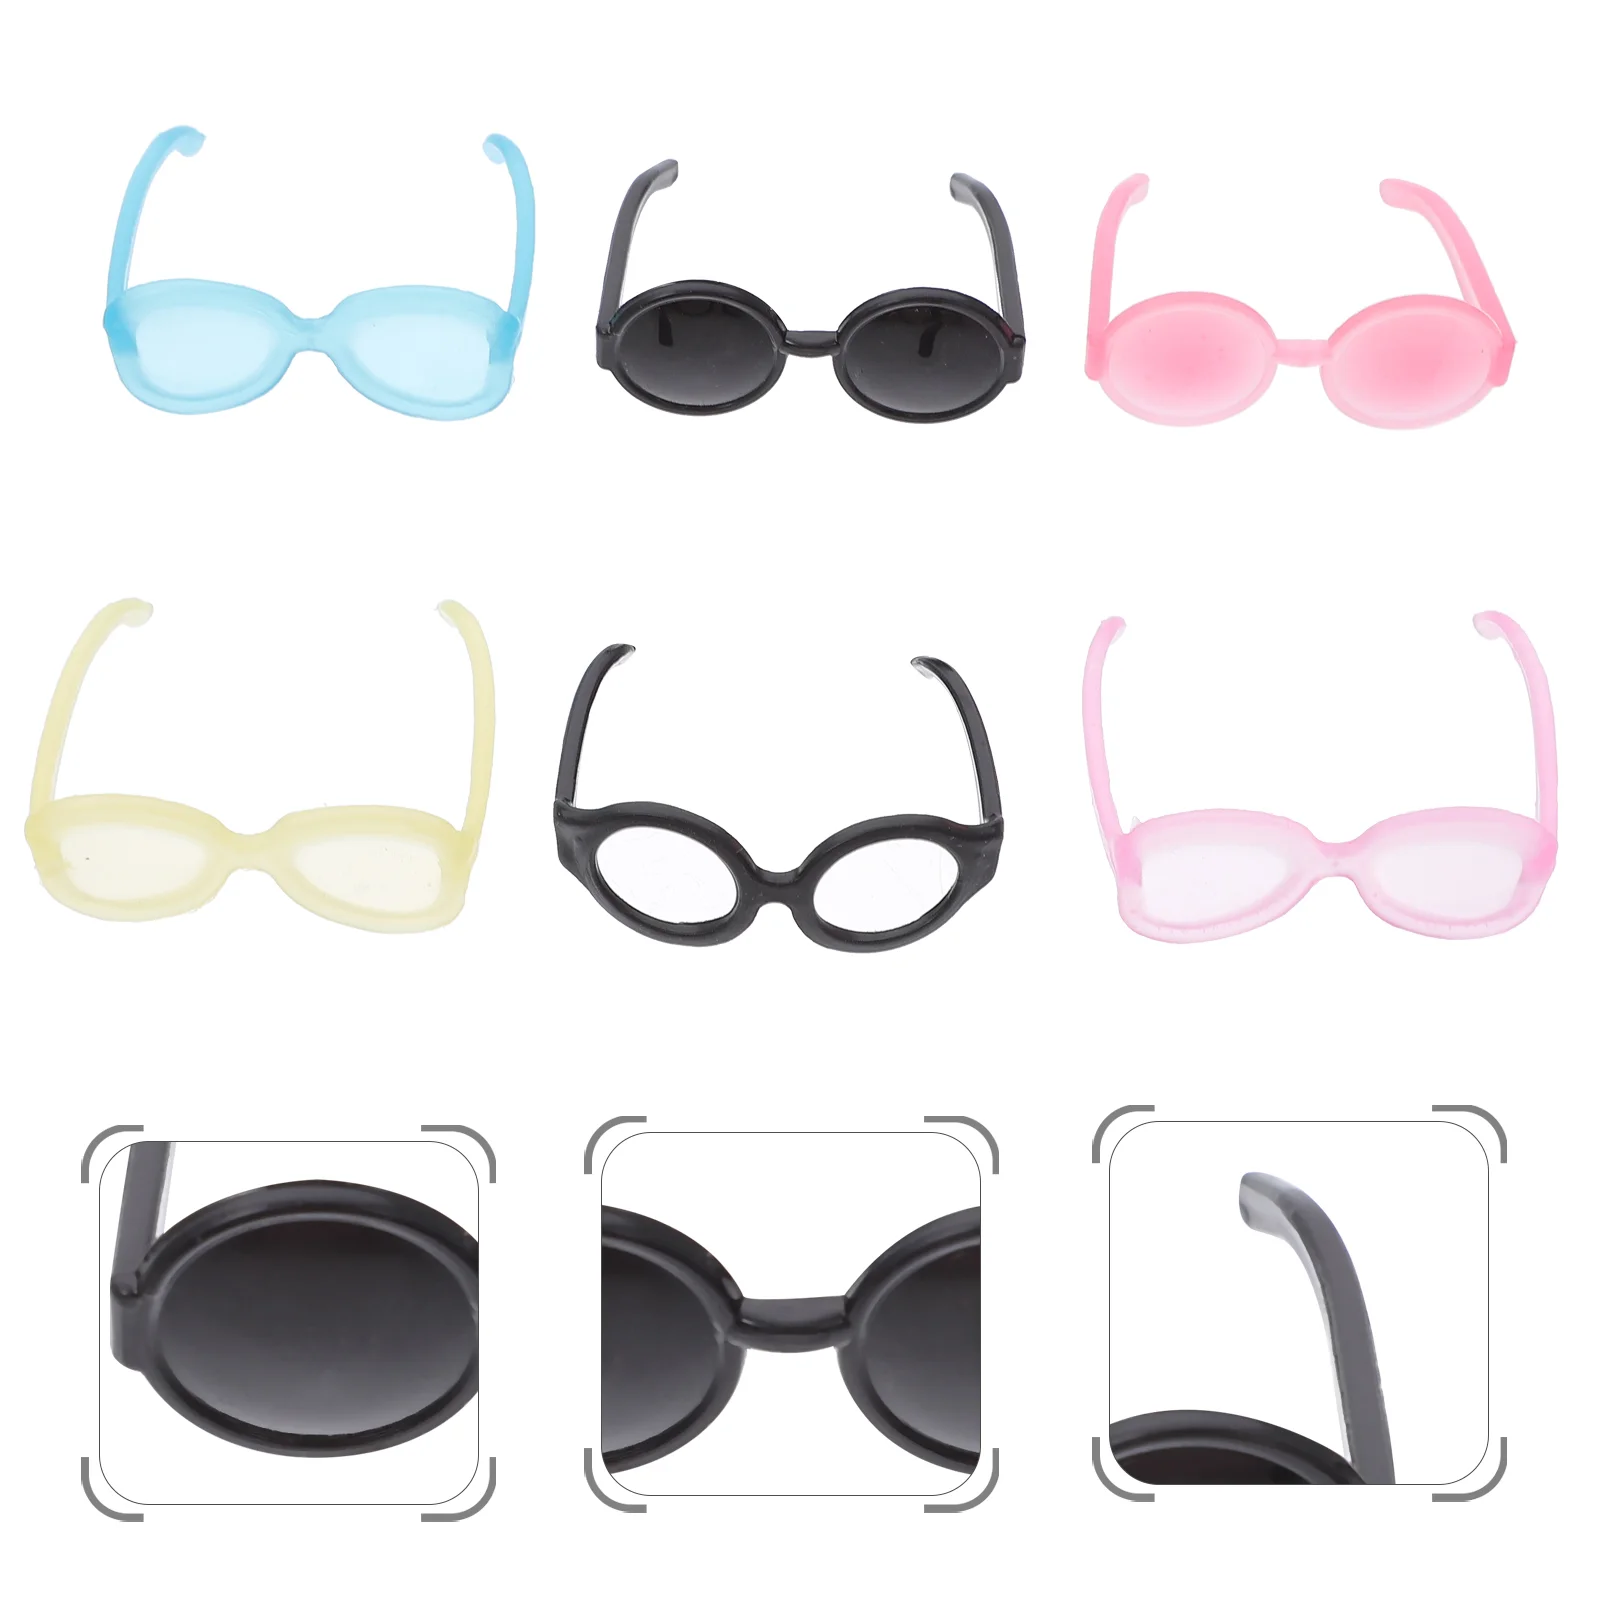 

Glasses Sunglasses Mini Eyeglasses Accessories Inch Dressing Crafts Miniature Baby Toy Play Tiny Costume Dog Dress Up Props Pet